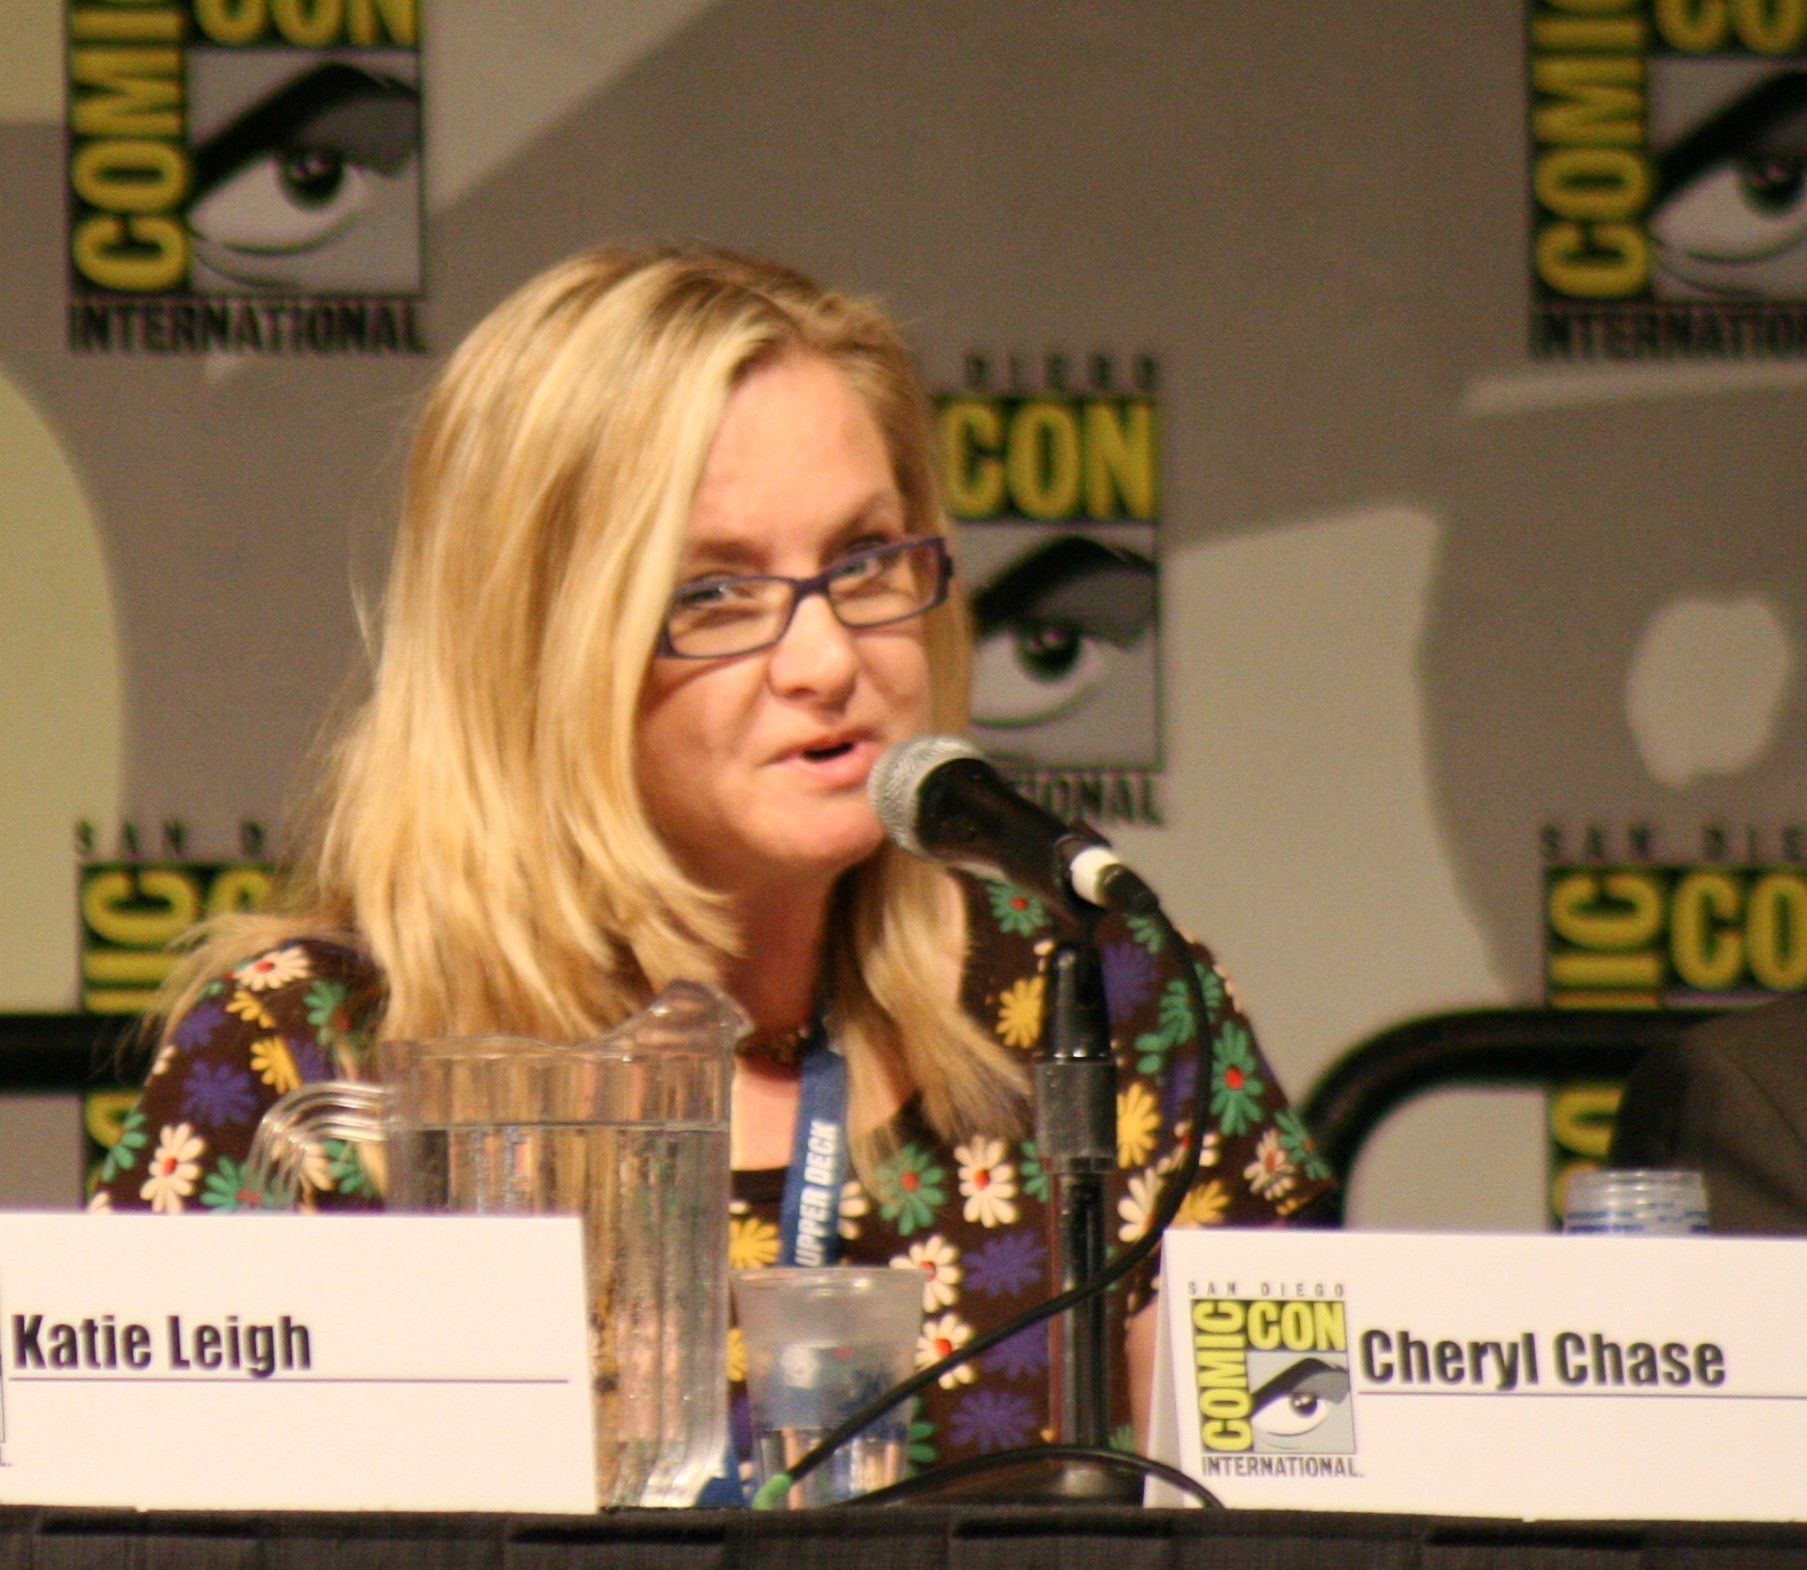 Cheryl Chase at the Cartoon Voices II panel.